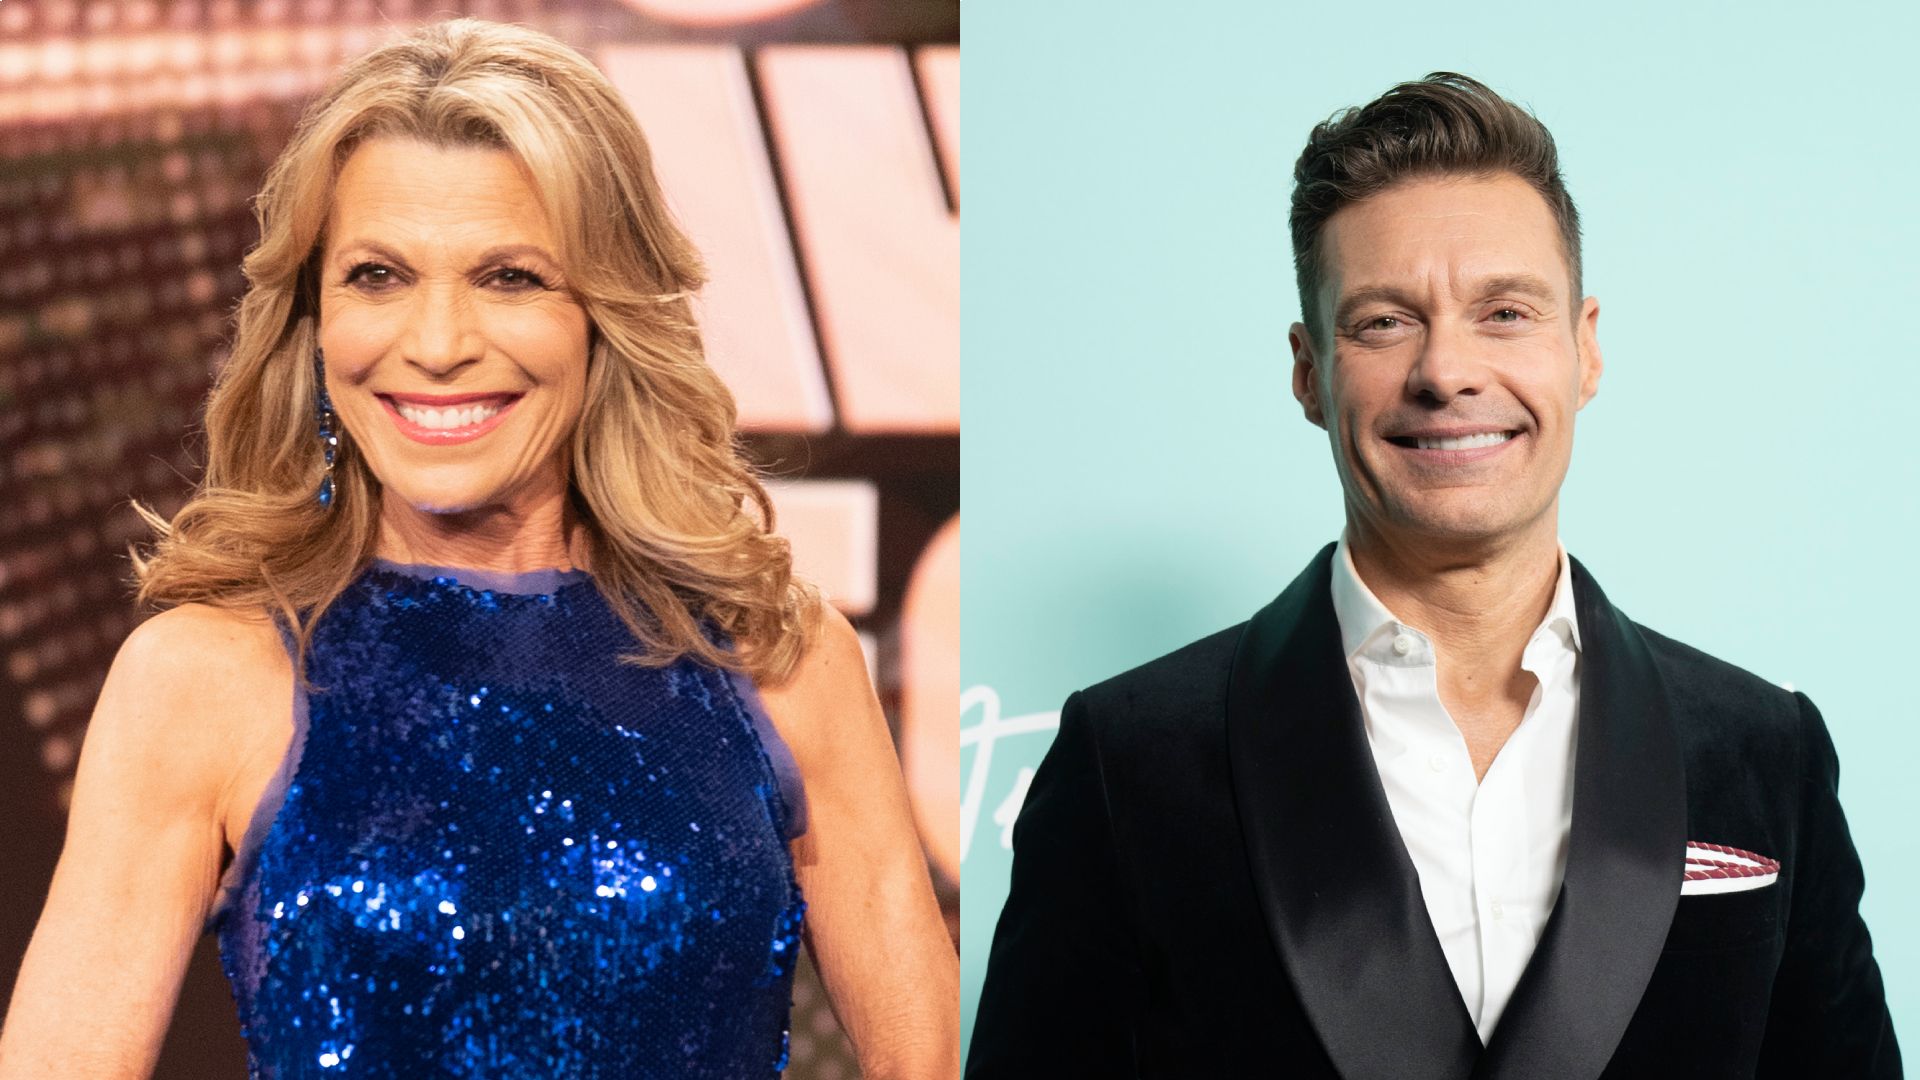 What Ryan Seacrest and Vanna White have said about working together on Wheel of Fortune after Pat Sajak exit